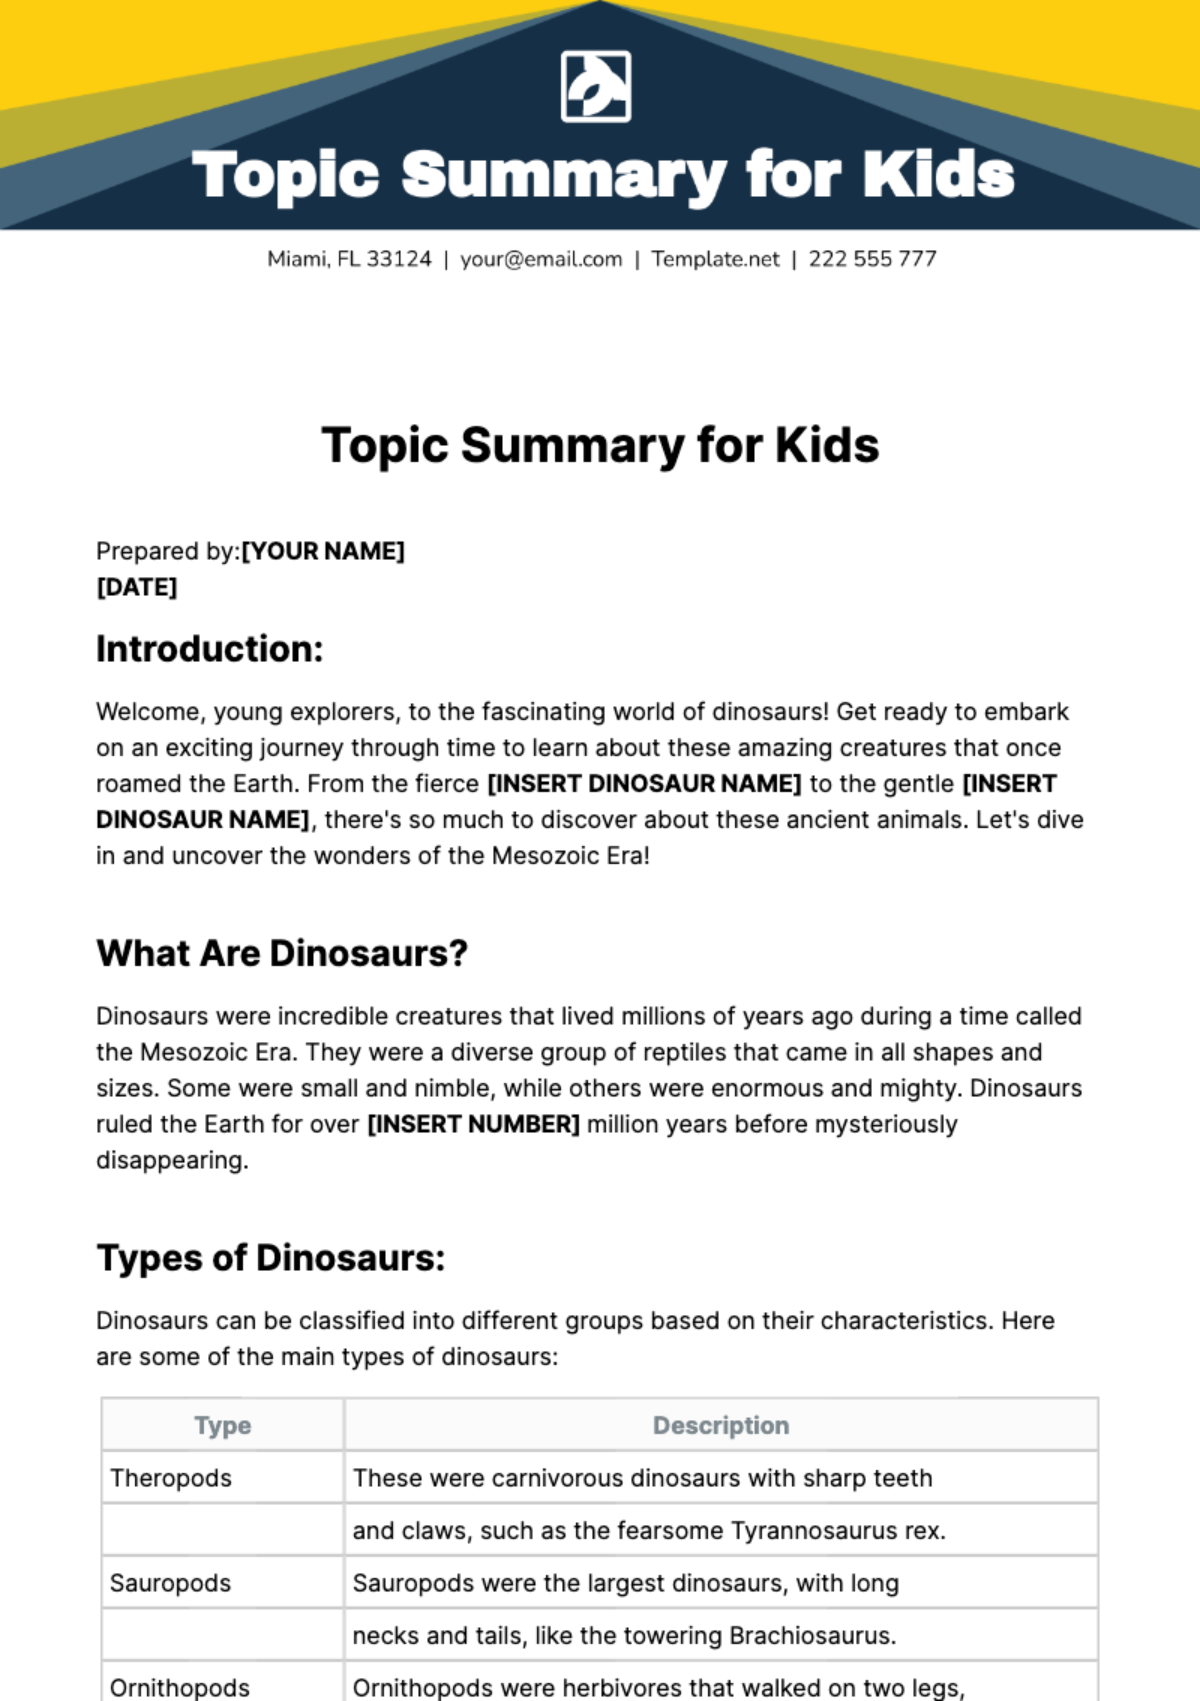 Free Topic Summary for Kids Template